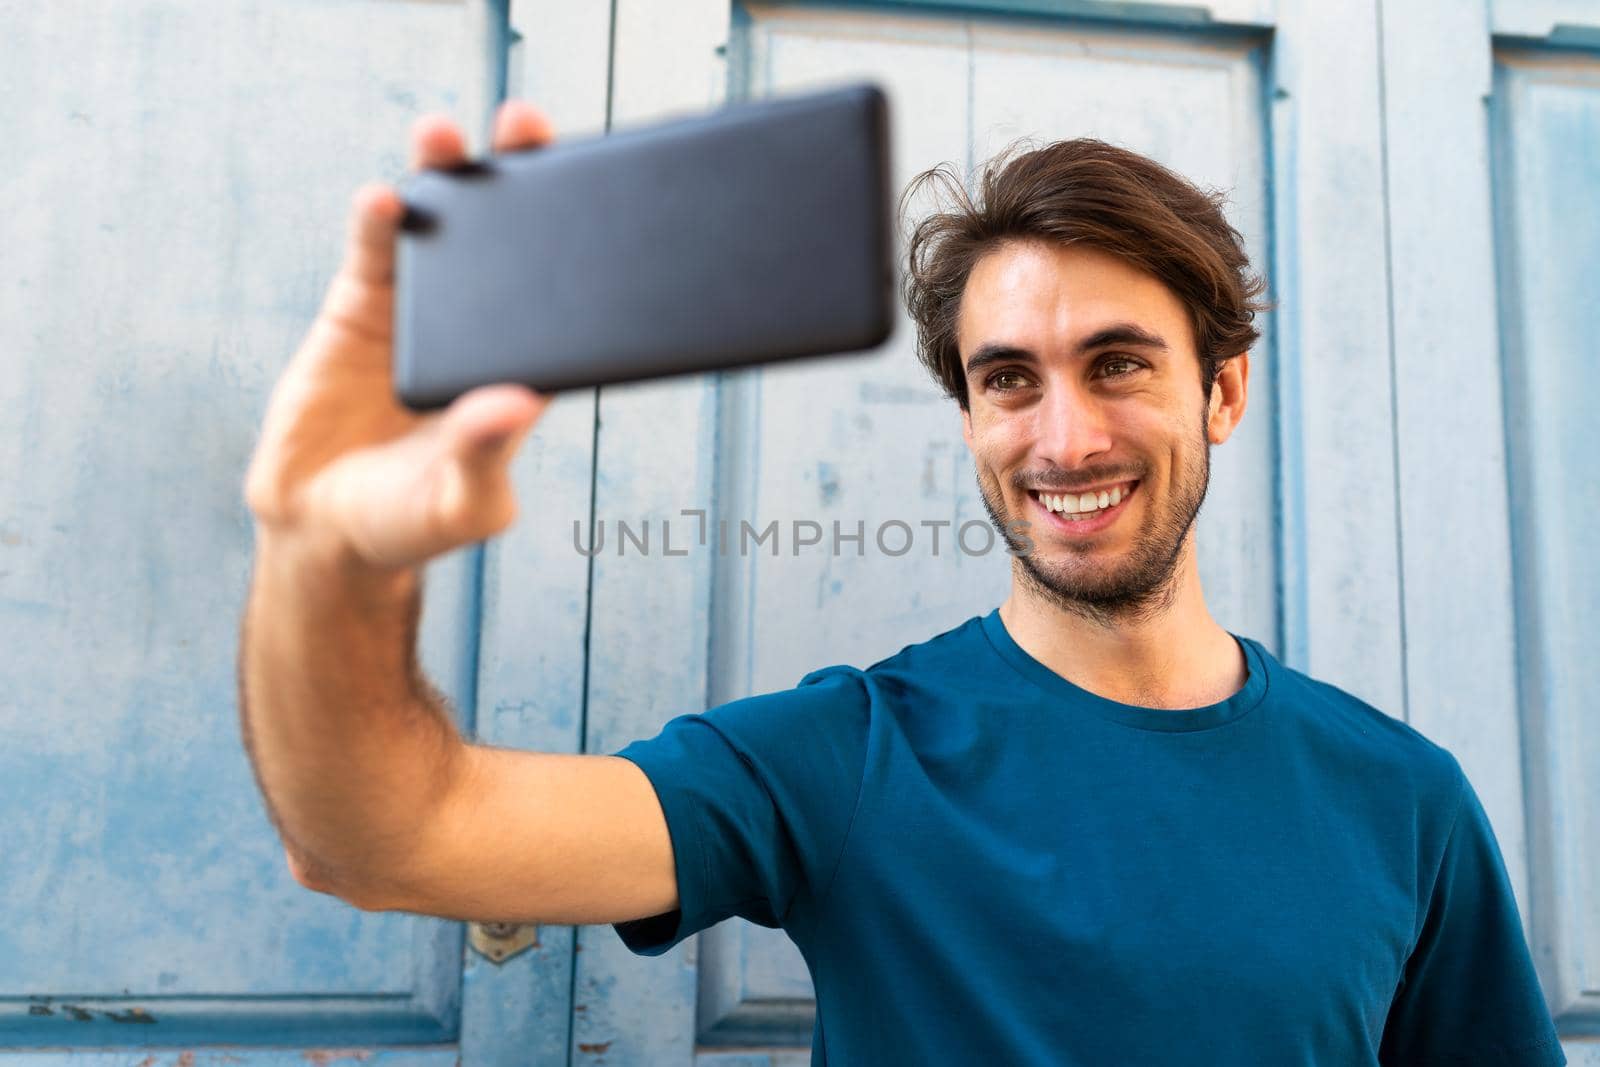 Young caucasian man taking a selfie with smartphone outdoors. Selective focus on face. Lifestyle and social media concept.